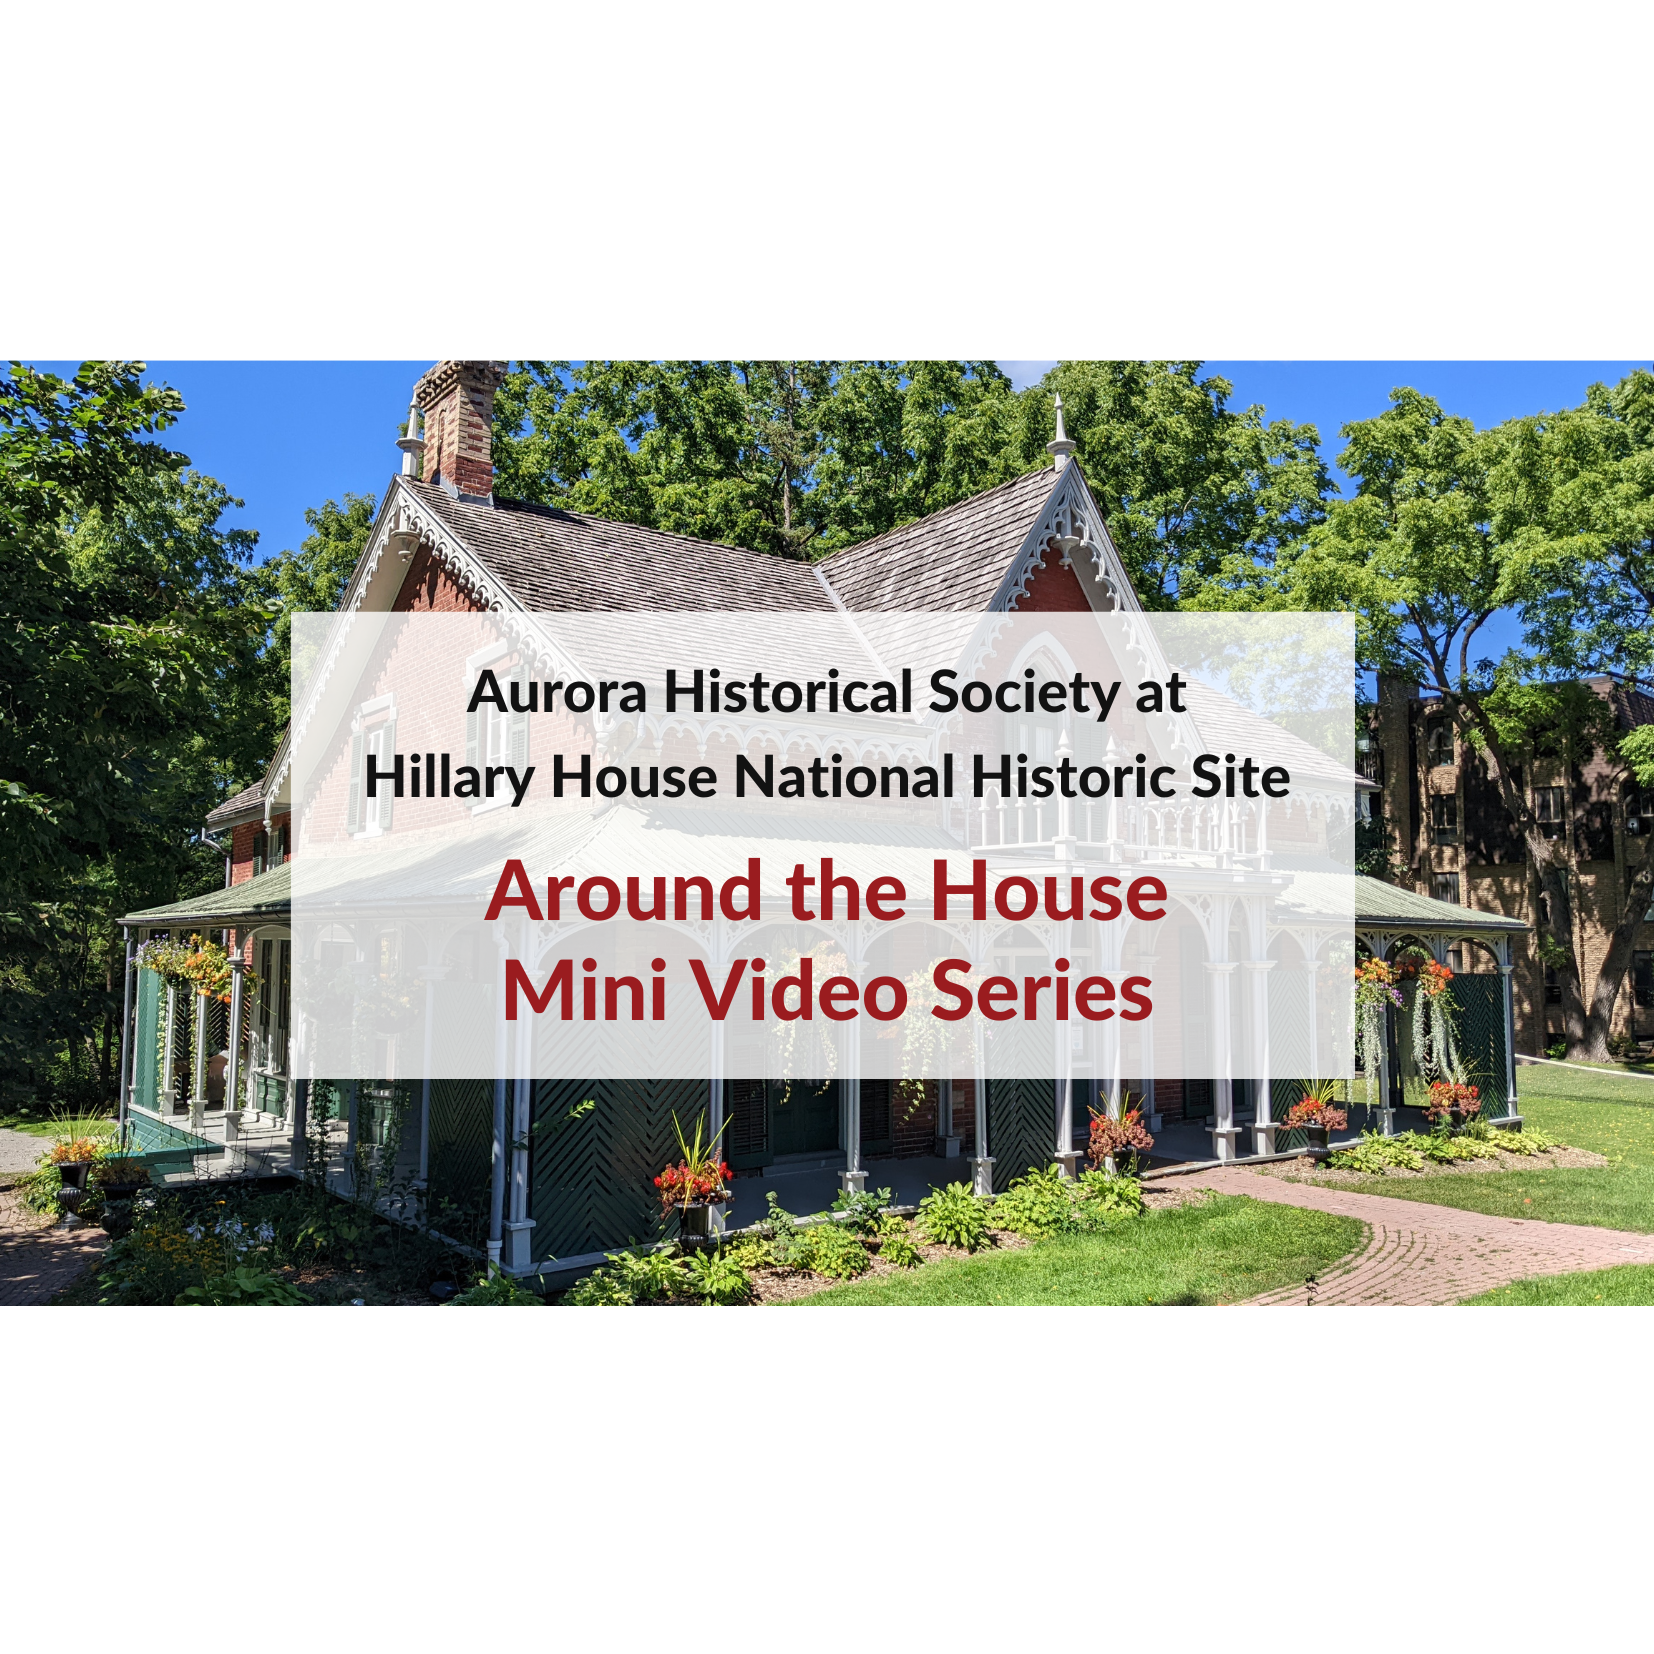 Aurora Historical Society & Hillary House - All You Need to Know